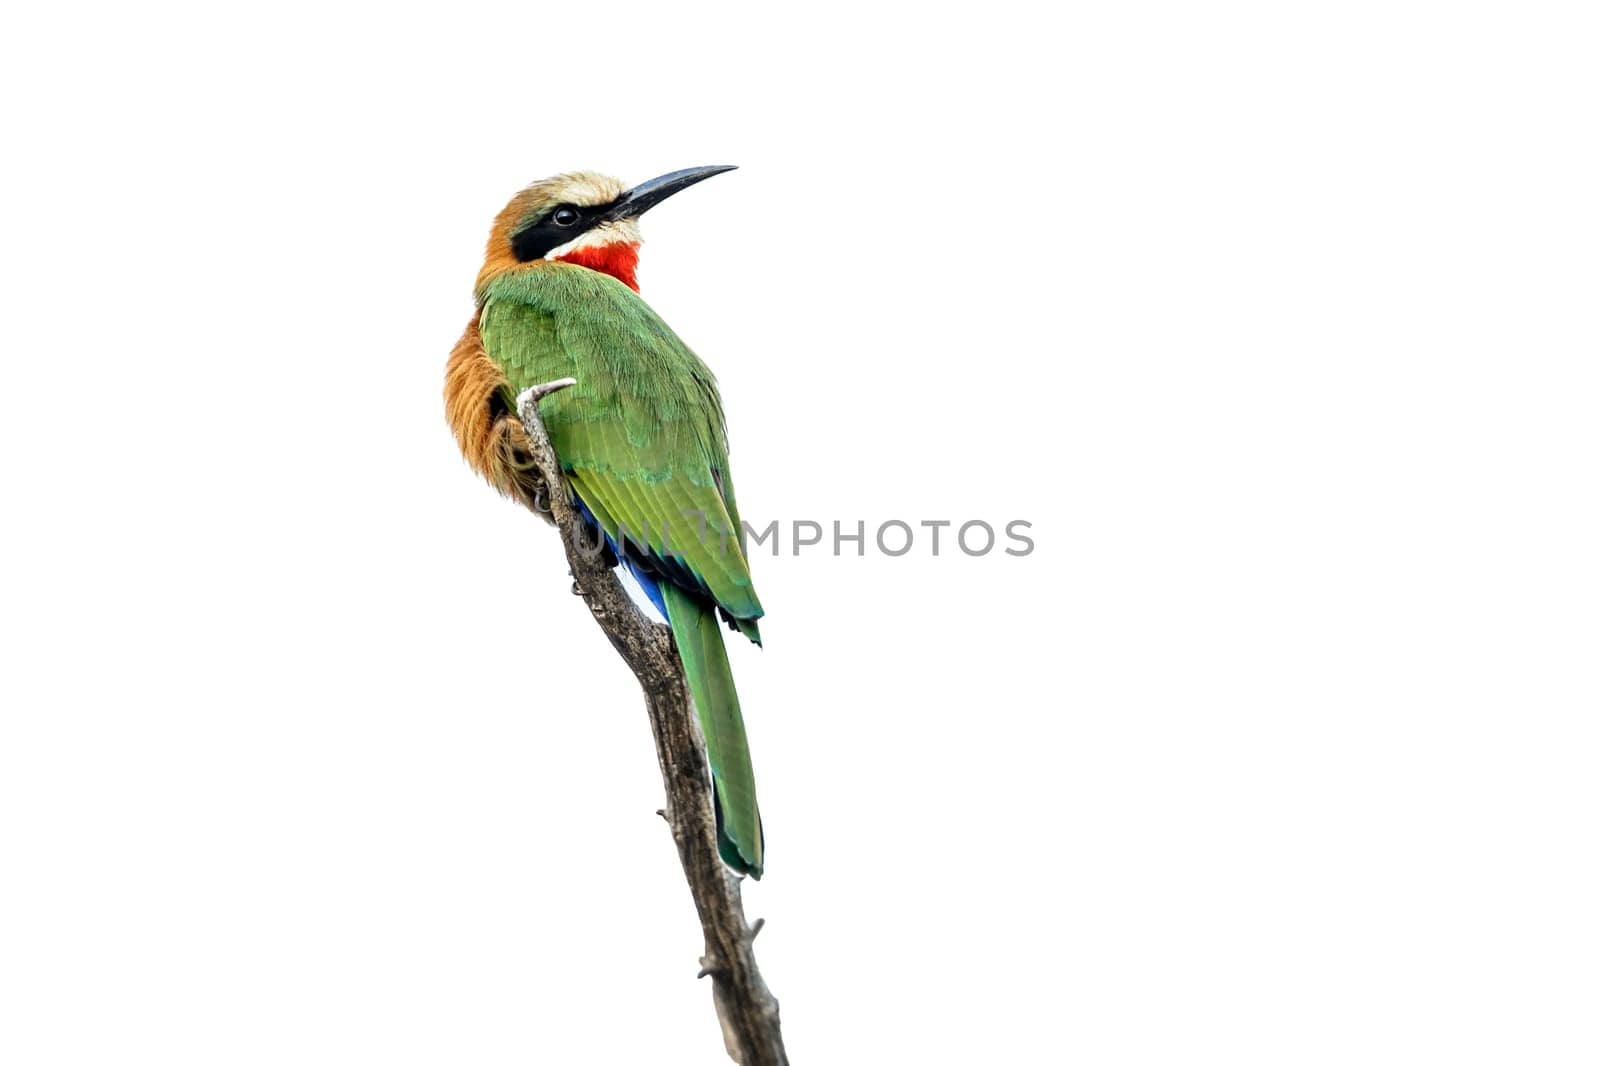 White fronted Bee eater standing on a branch isolated in white background in Kruger National park, South Africa ; Specie Merops bullockoides family of Meropidae